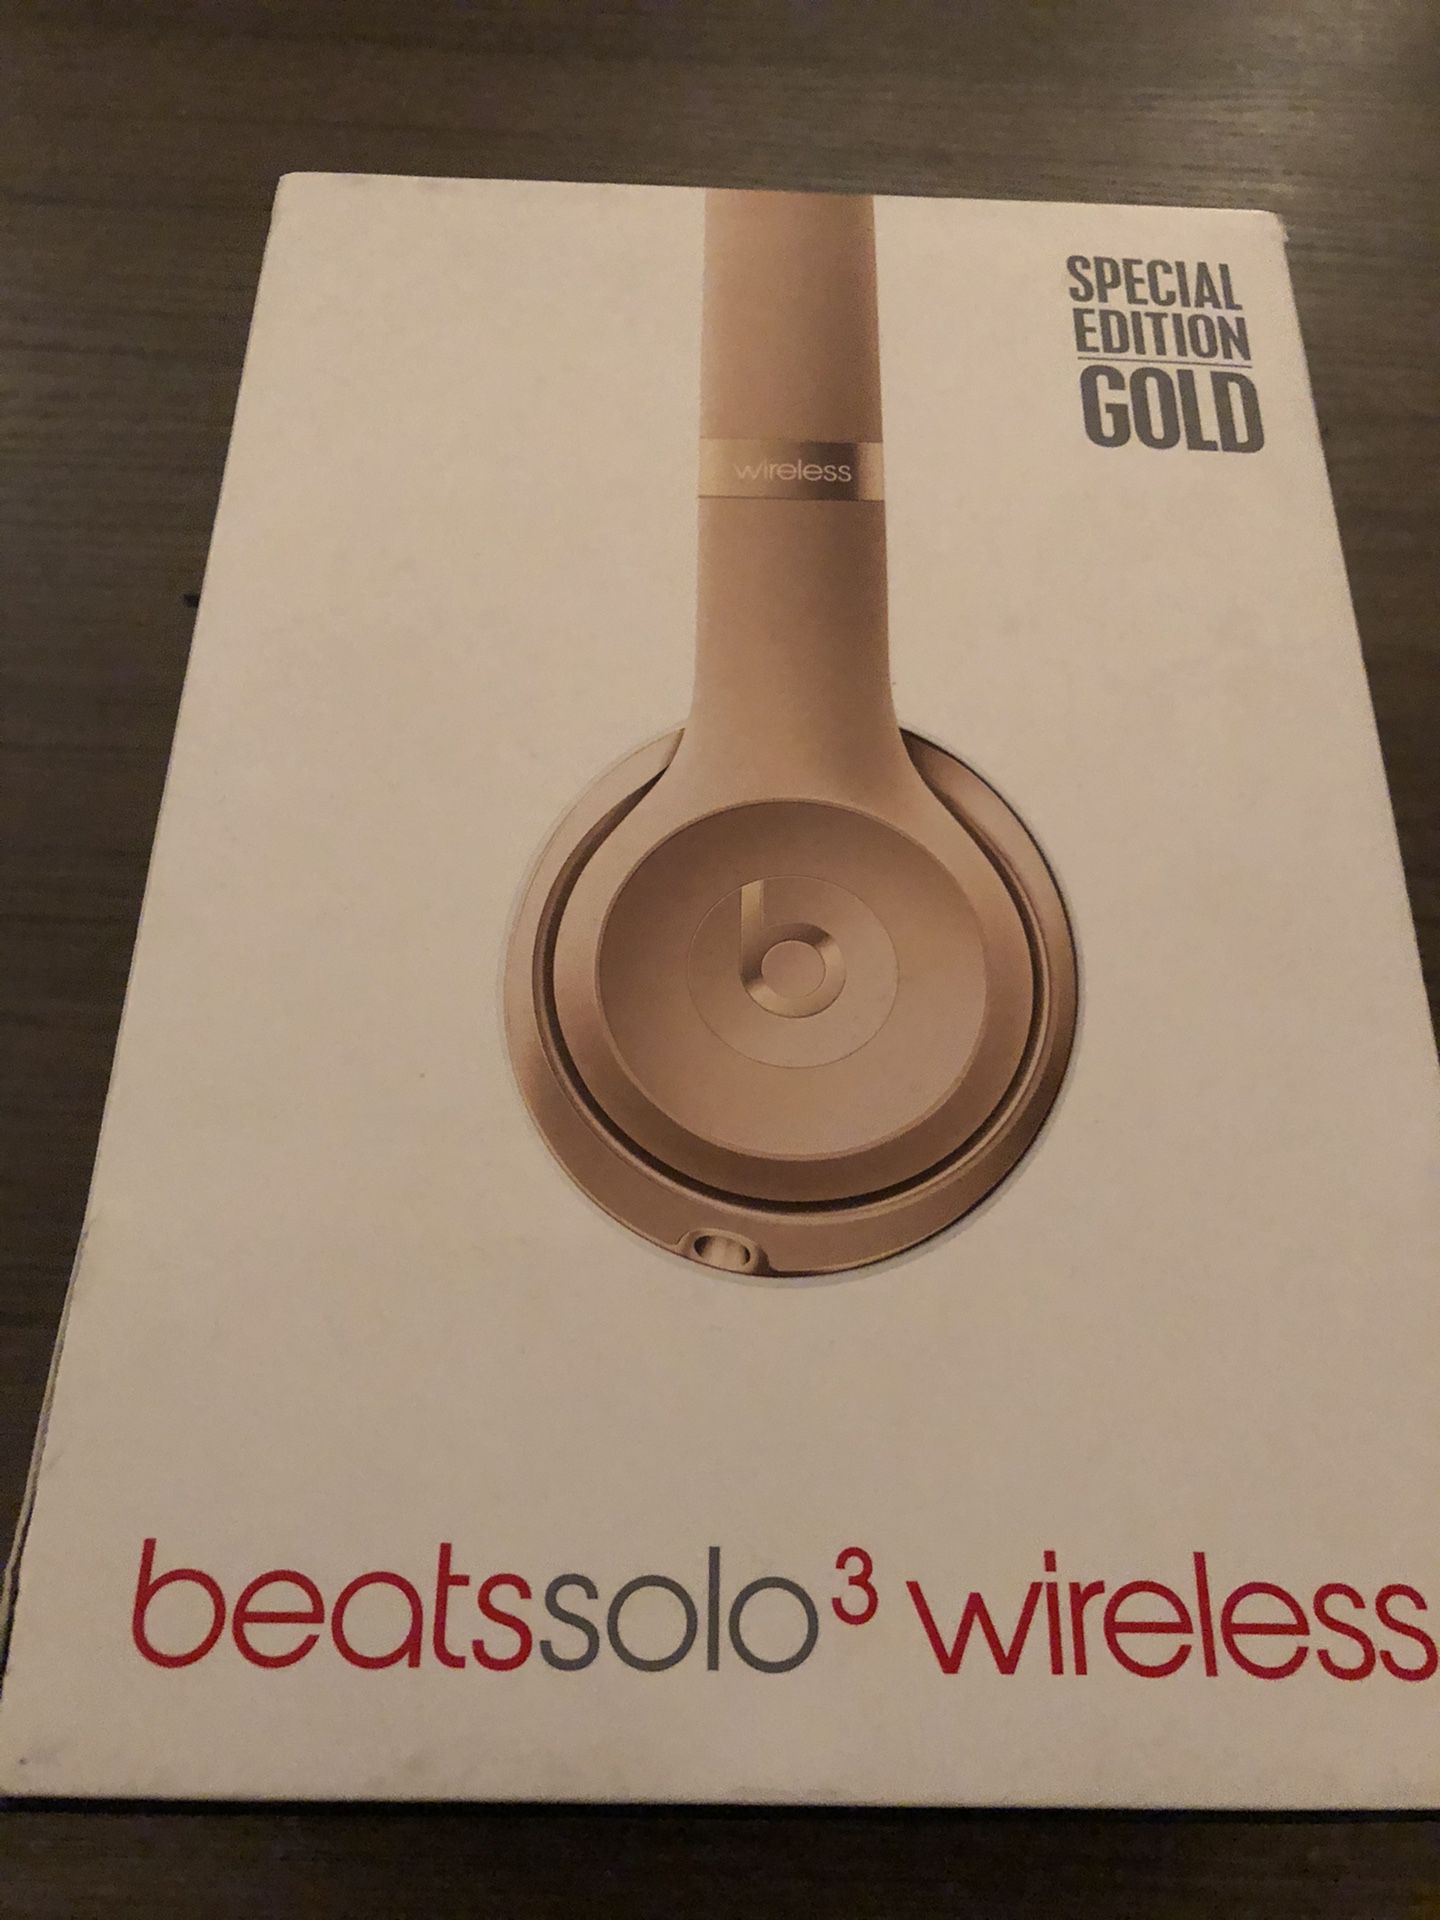 Beats Solo 3 Wireless Special Edition Gold